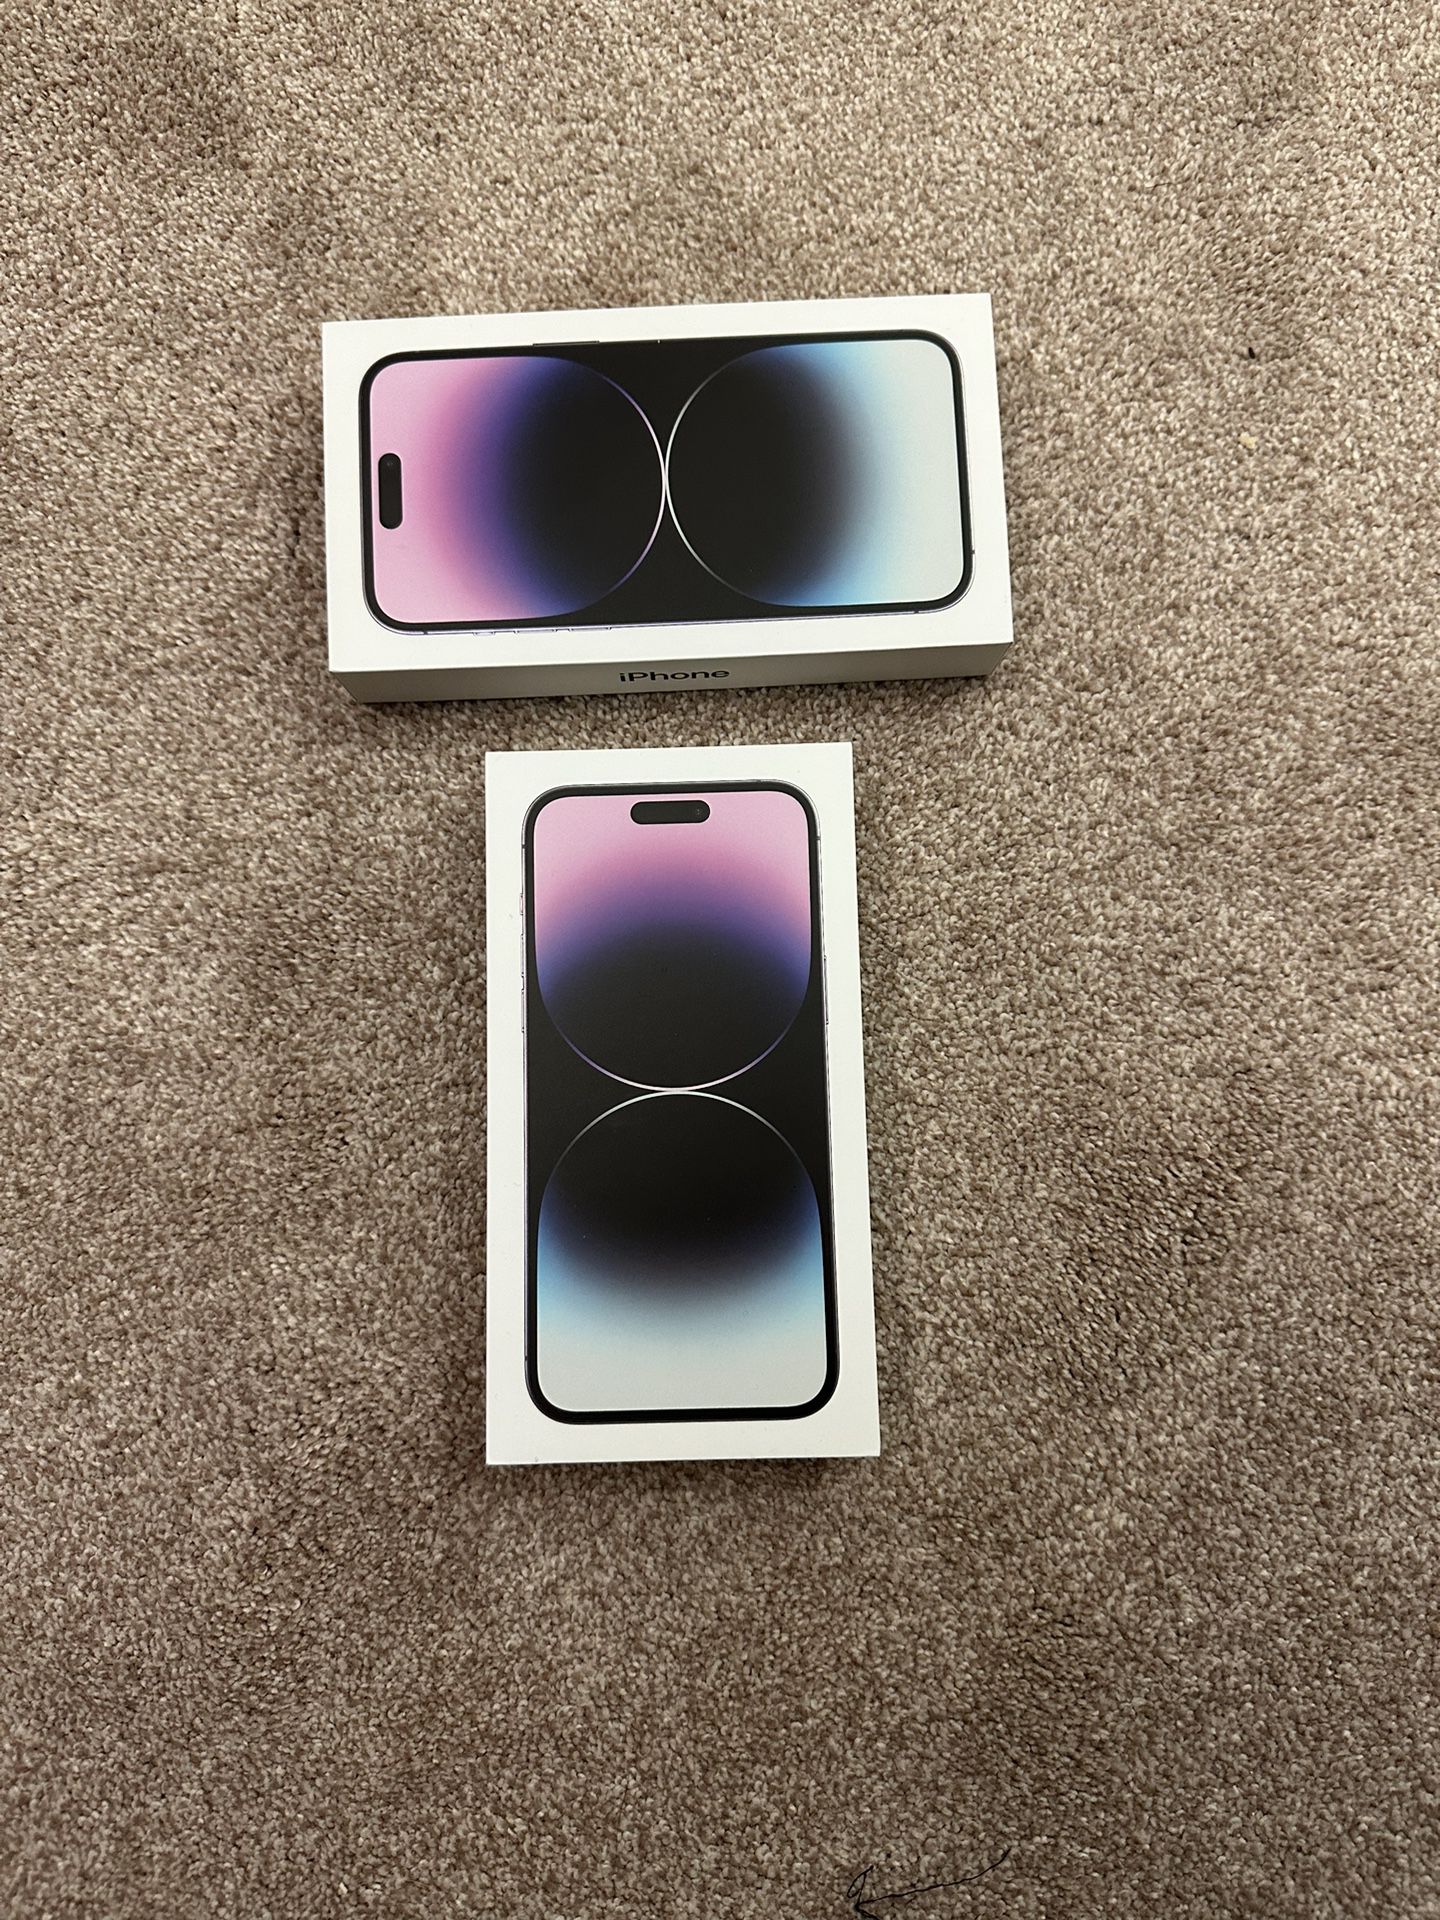 Absolutely Firm Price $1,260 DEEP PURPLE iPhone 14 Pro Max 128gb factory Unlocked For All Carriers